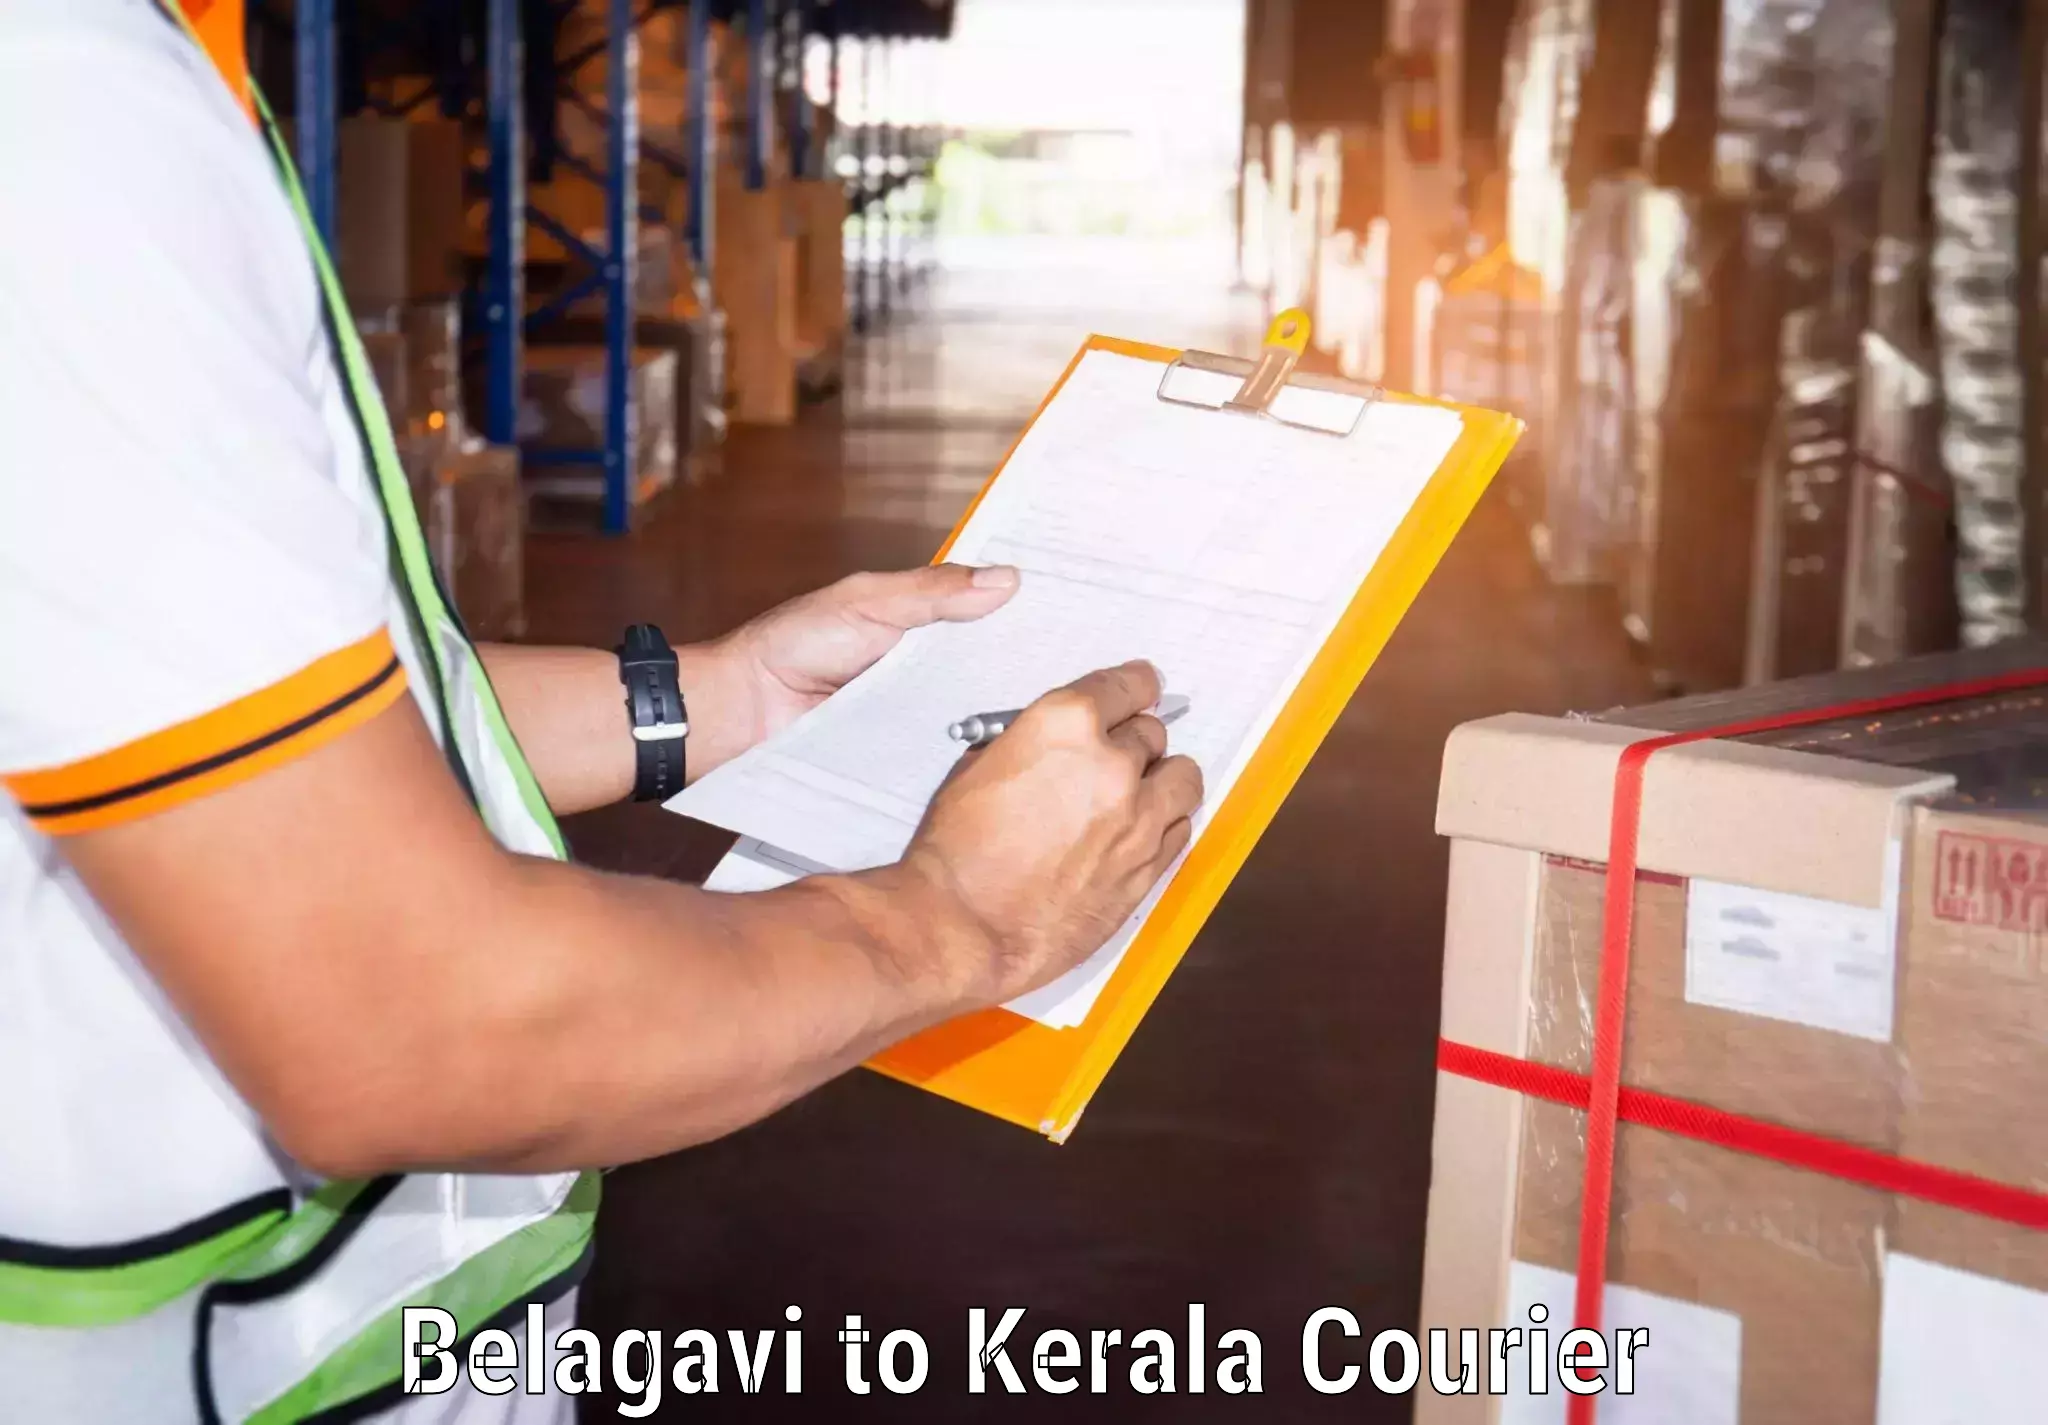 Reliable delivery network Belagavi to Kochi